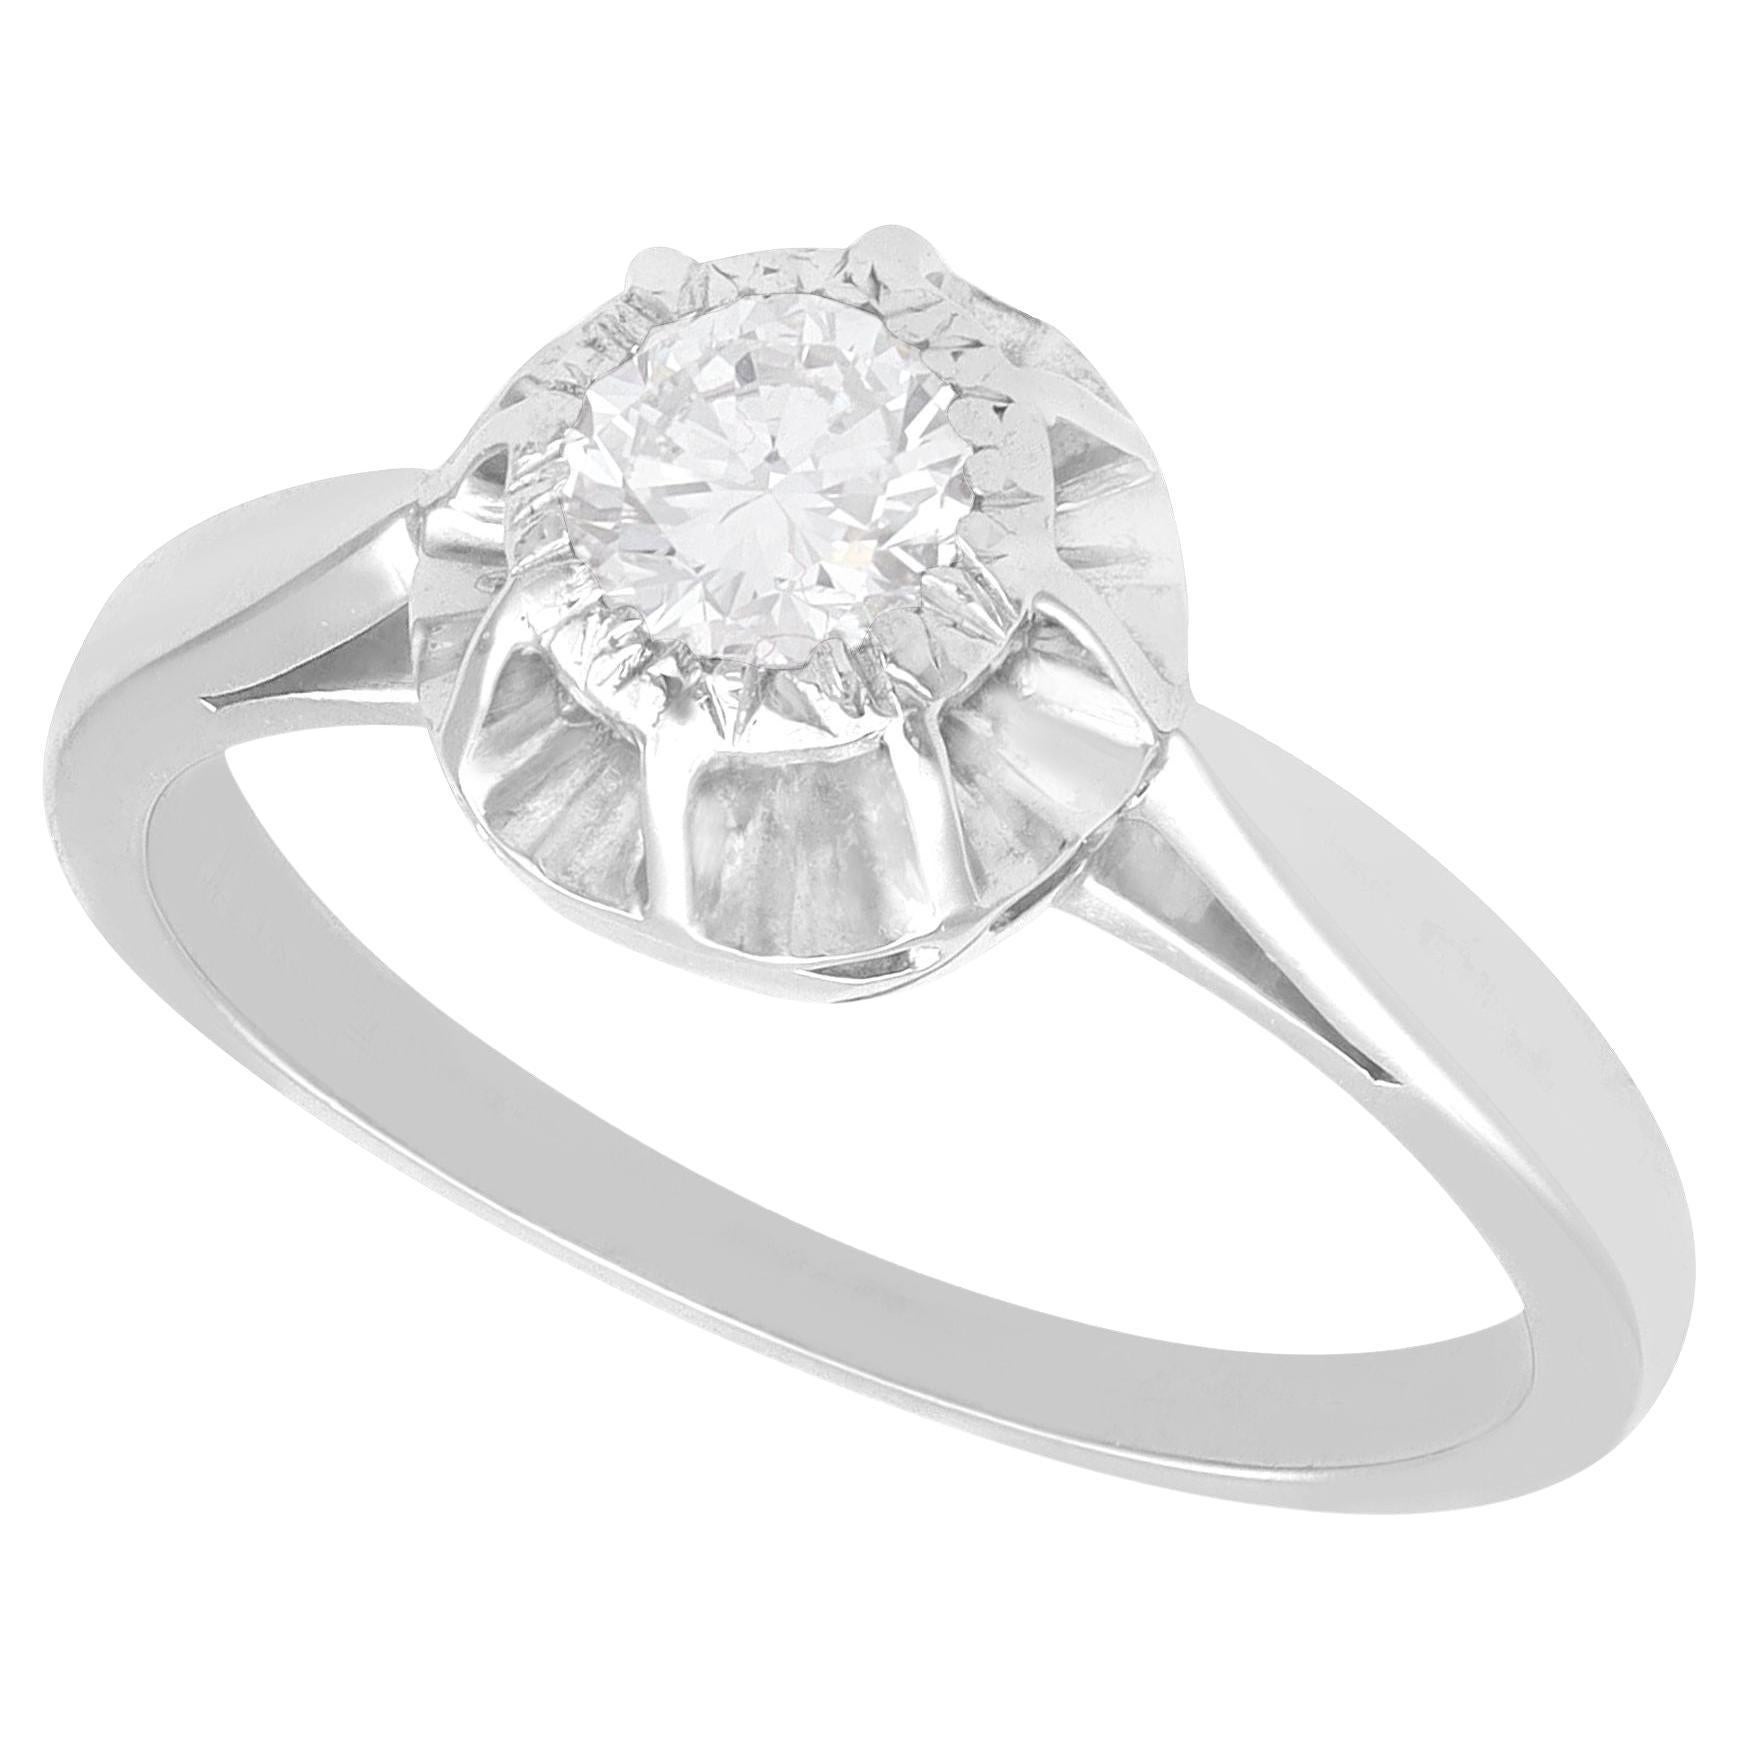 Antique 0.33 Carat Diamond and 18k White Gold Solitaire Ring For Sale